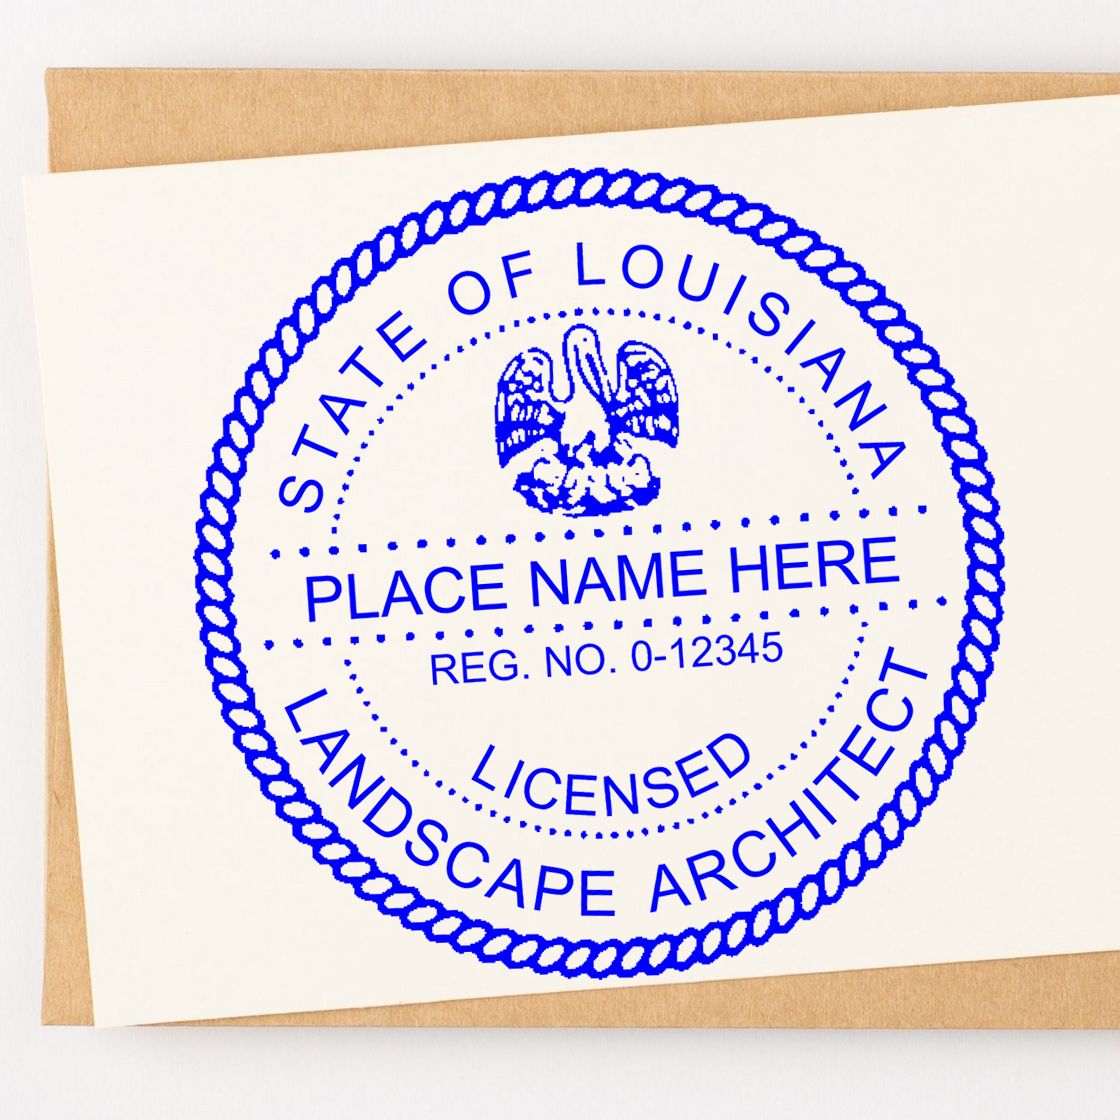 Another Example of a stamped impression of the Slim Pre-Inked Louisiana Landscape Architect Seal Stamp on a piece of office paper.